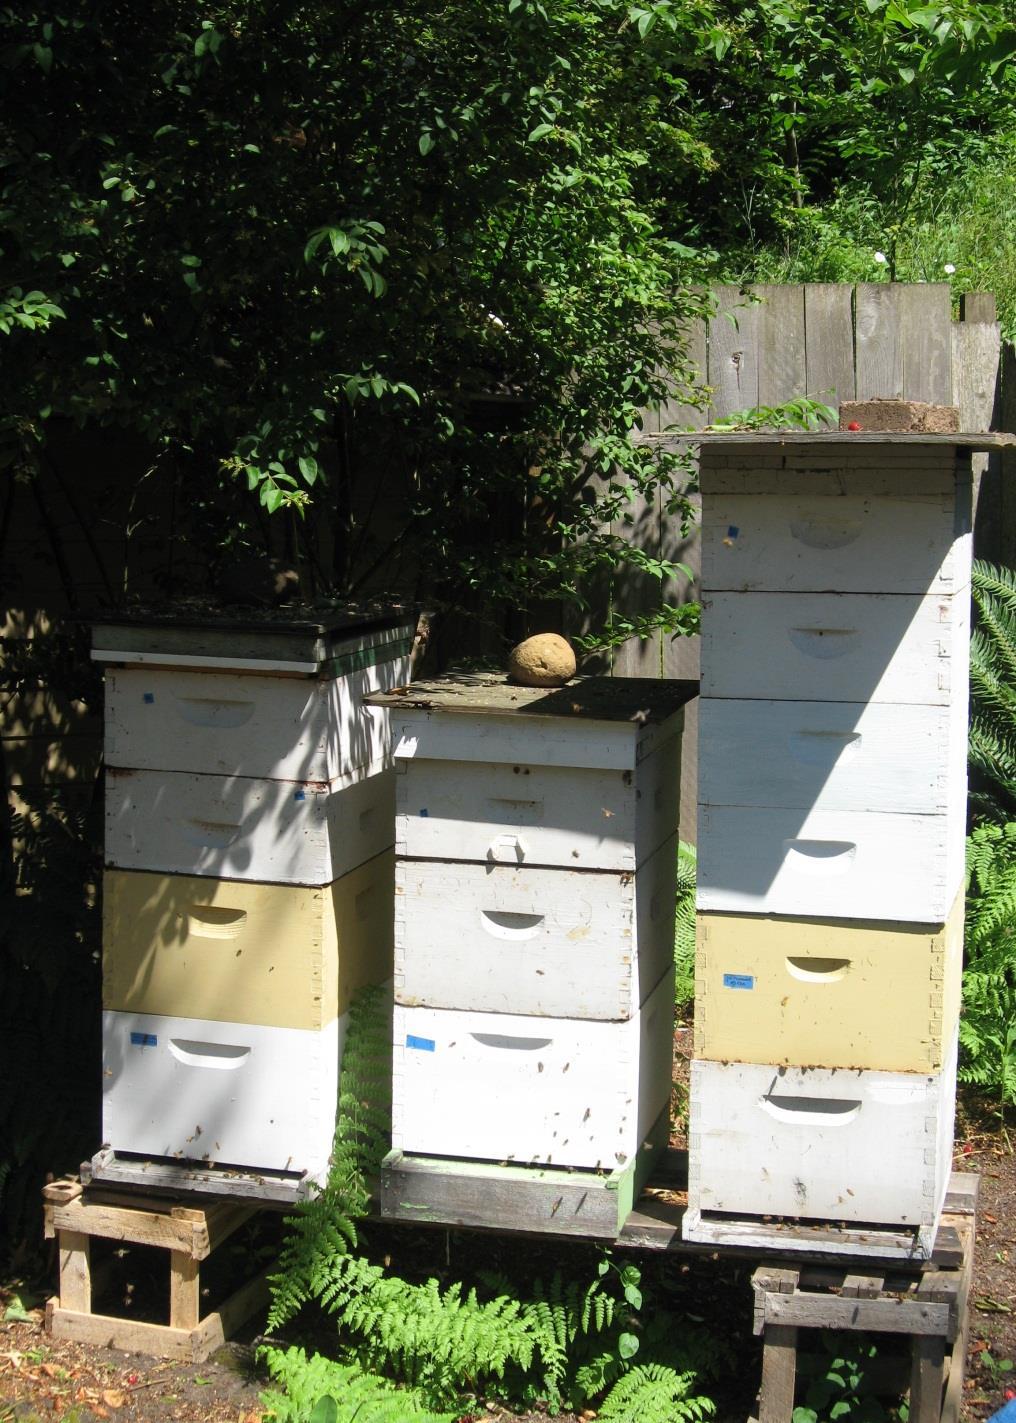 Barriers: Confusing regulations Neighbor approval for bees Limit on